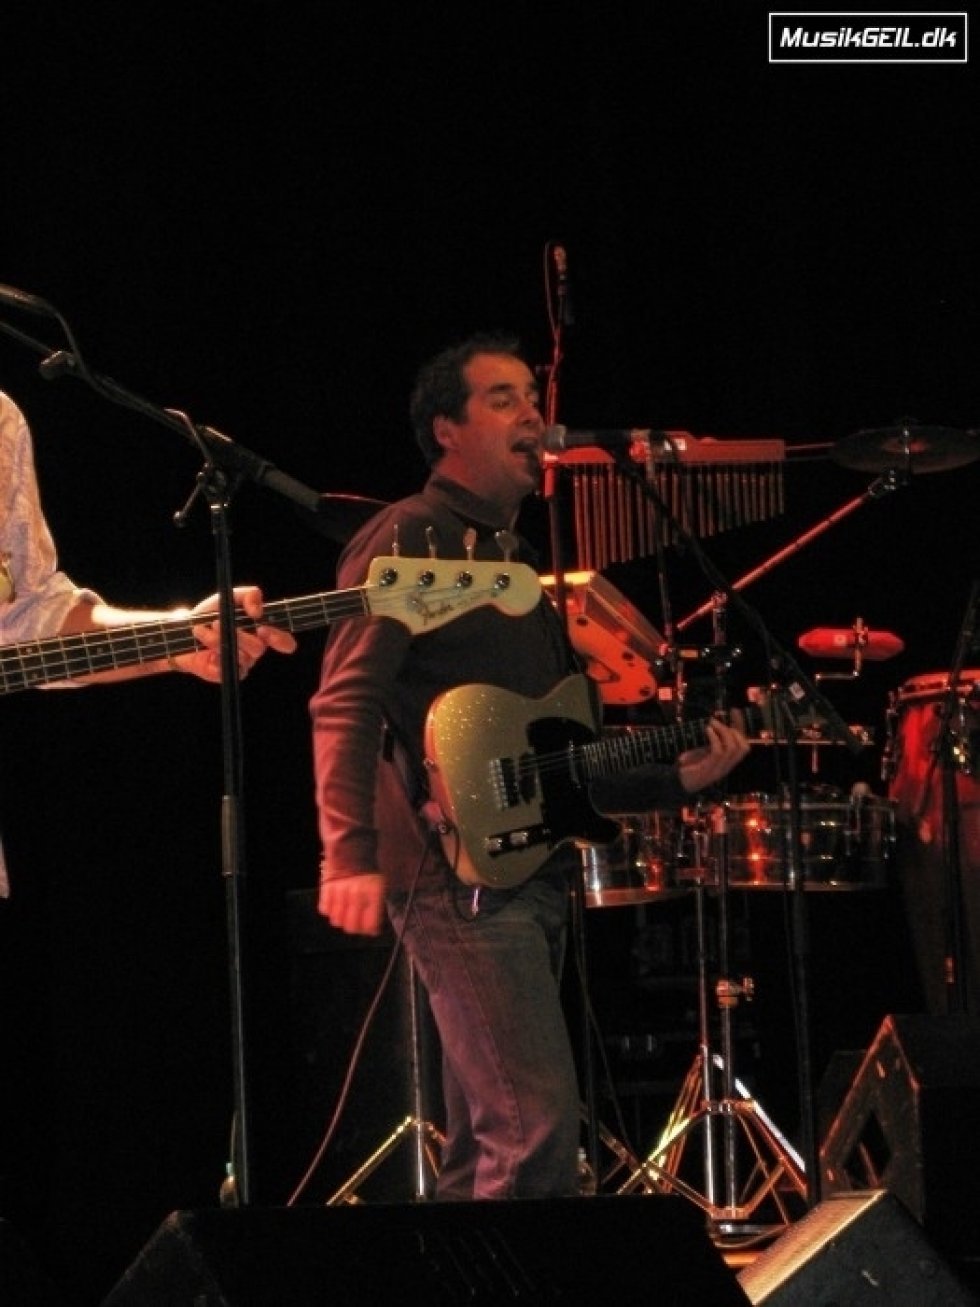 10CC featuring Graham Gouldman and Friends